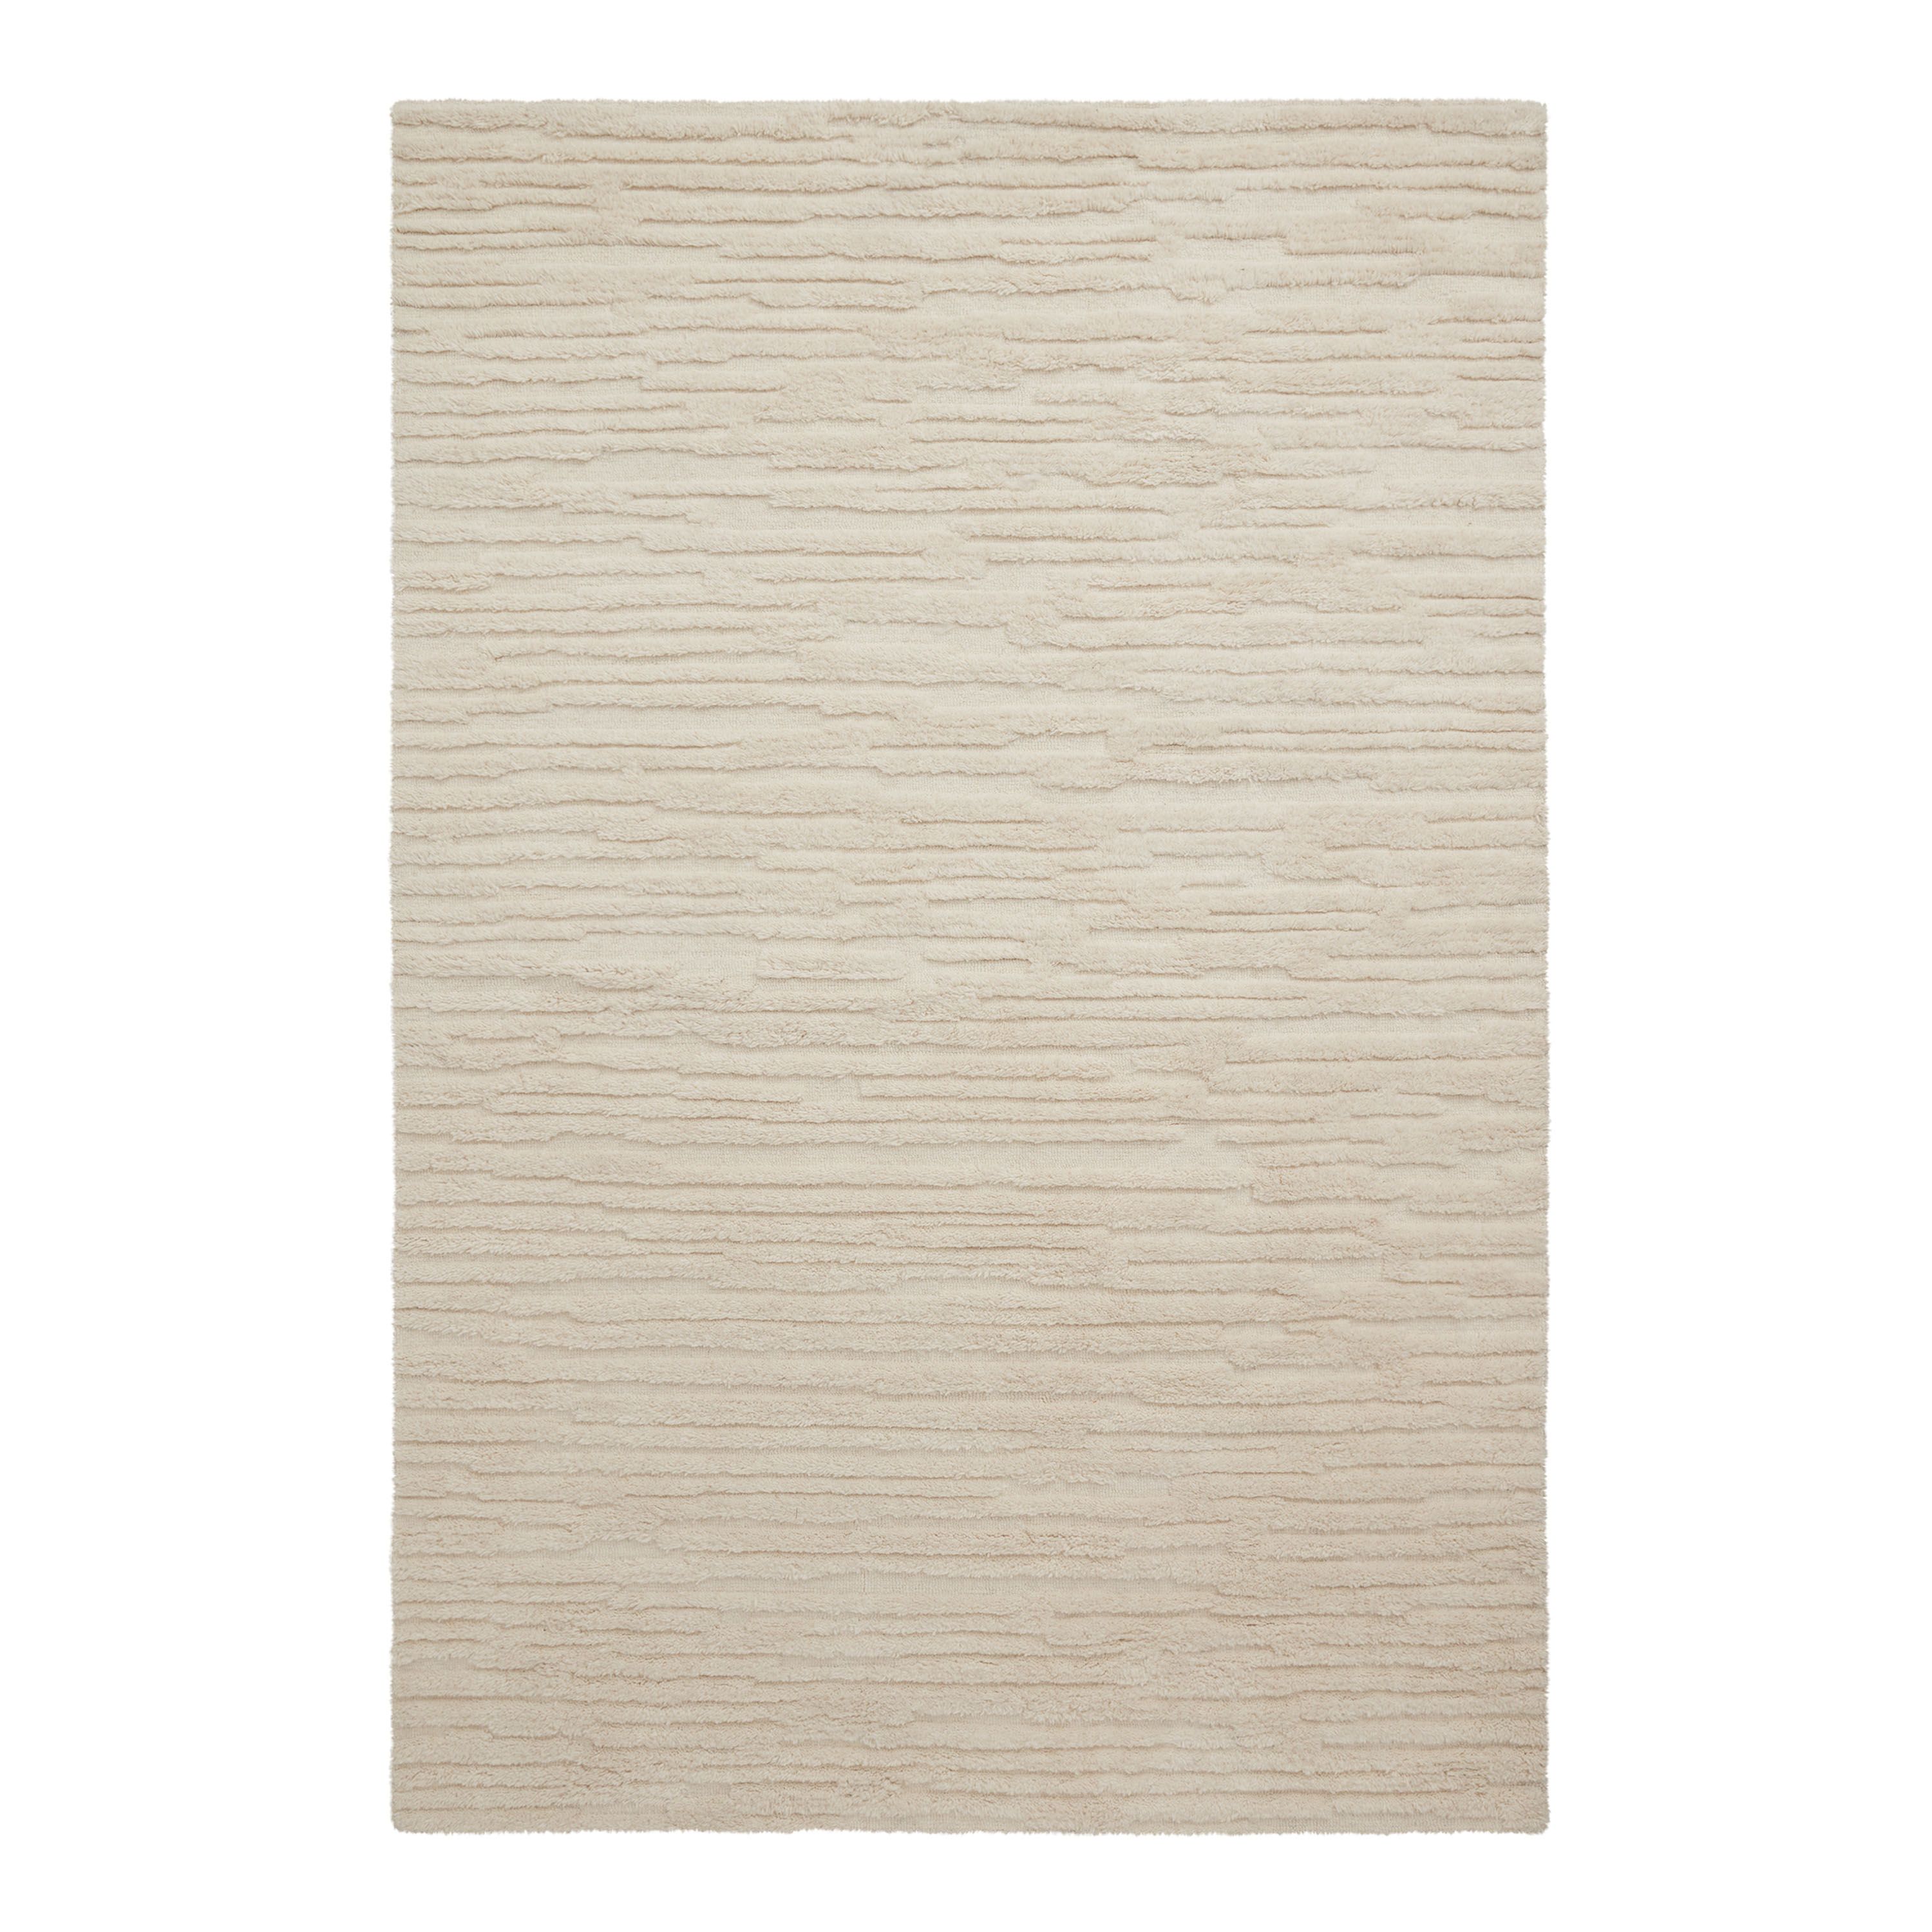 Willow Tonal Ivory Abstract Tufted Wool Area Rug | World Market